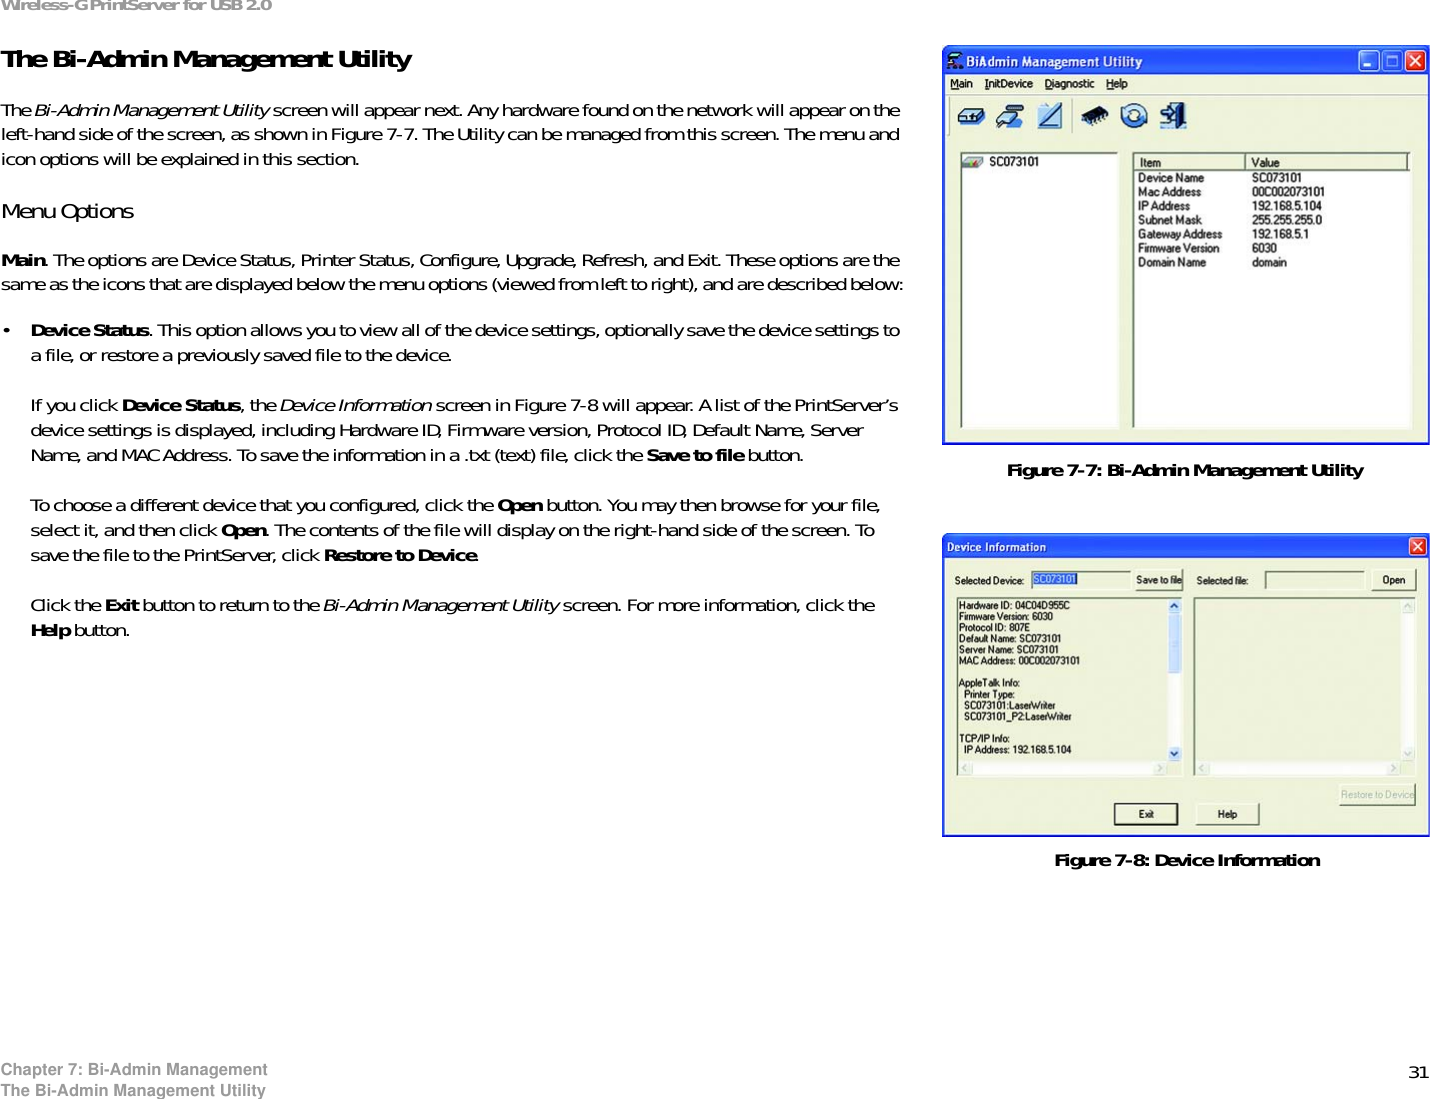 31Wireless-G PrintServer for USB 2.0Chapter 7: Bi-Admin ManagementThe Bi-Admin Management UtilityThe Bi-Admin Management UtilityThe Bi-Admin Management Utility screen will appear next. Any hardware found on the network will appear on the left-hand side of the screen, as shown in Figure 7-7. The Utility can be managed from this screen. The menu and icon options will be explained in this section.Menu OptionsMain. The options are Device Status, Printer Status, Configure, Upgrade, Refresh, and Exit. These options are the same as the icons that are displayed below the menu options (viewed from left to right), and are described below:•Device Status. This option allows you to view all of the device settings, optionally save the device settings to a file, or restore a previously saved file to the device.If you click Device Status, the Device Information screen in Figure 7-8 will appear. A list of the PrintServer’s device settings is displayed, including Hardware ID, Firmware version, Protocol ID, Default Name, Server Name, and MAC Address. To save the information in a .txt (text) file, click the Save to file button. To choose a different device that you configured, click the Open button. You may then browse for your file, select it, and then click Open. The contents of the file will display on the right-hand side of the screen. To save the file to the PrintServer, click Restore to Device.Click the Exit button to return to the Bi-Admin Management Utility screen. For more information, click the Help button.Figure 7-7: Bi-Admin Management UtilityFigure 7-8: Device Information